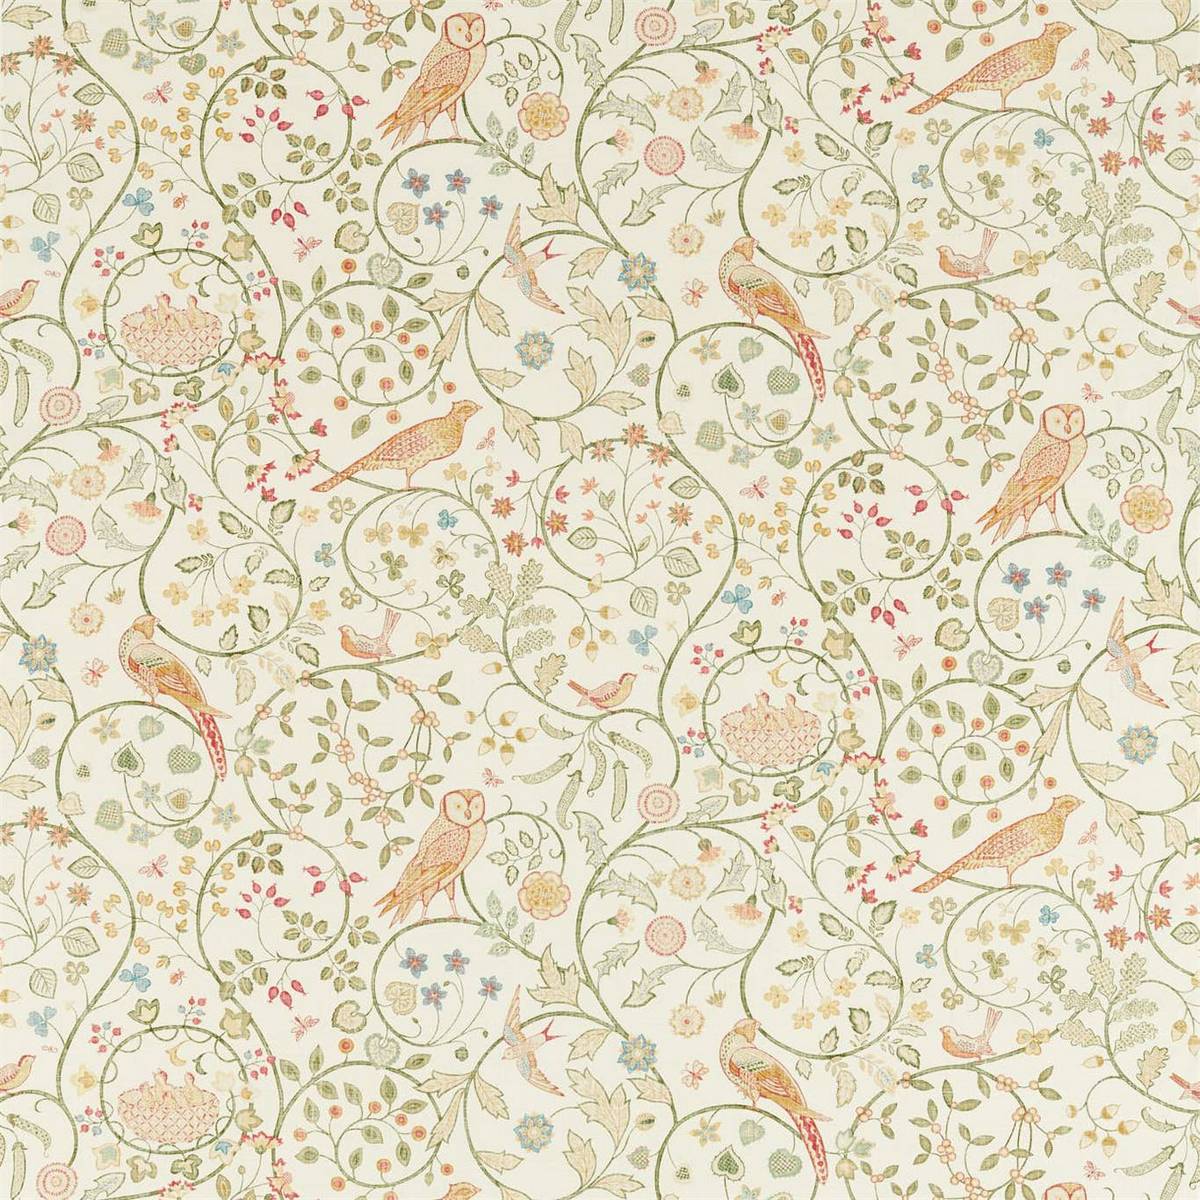 Newill Chintz Fabric by William Morris & Co.